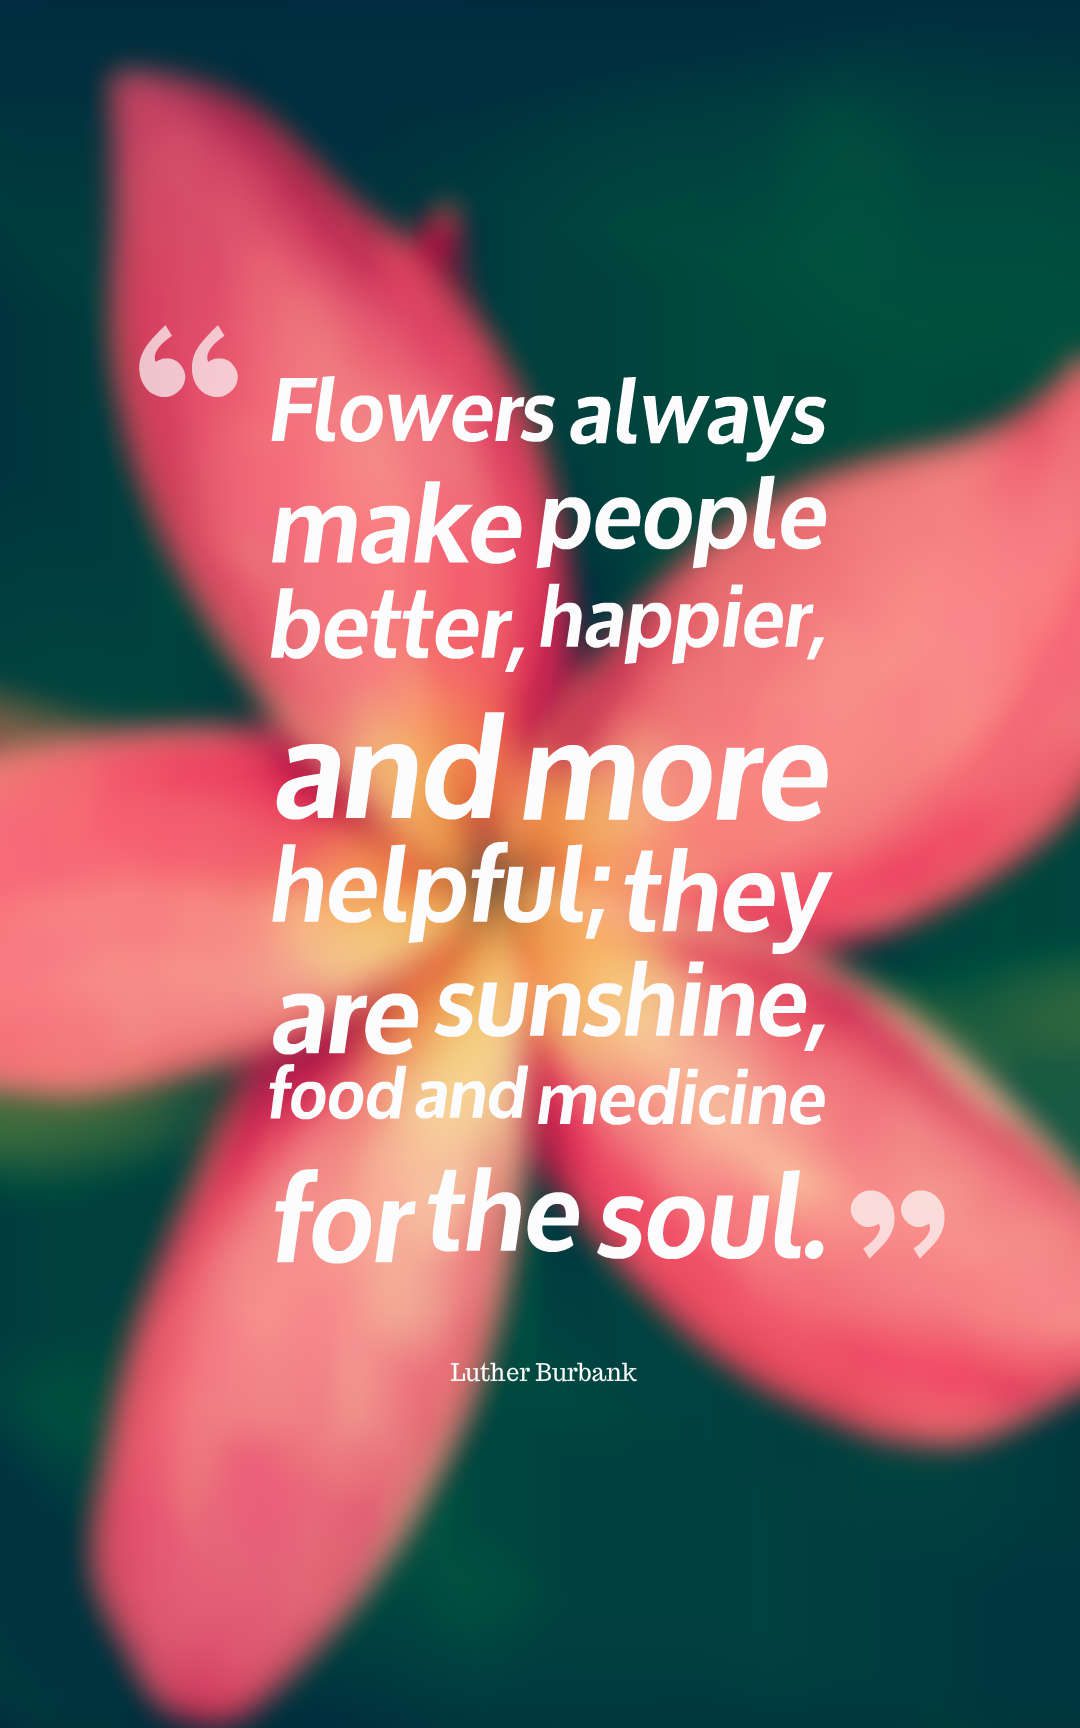 Flowers always make people better, happier, and more helpful; they are sunshine, food and medicine for the soul.